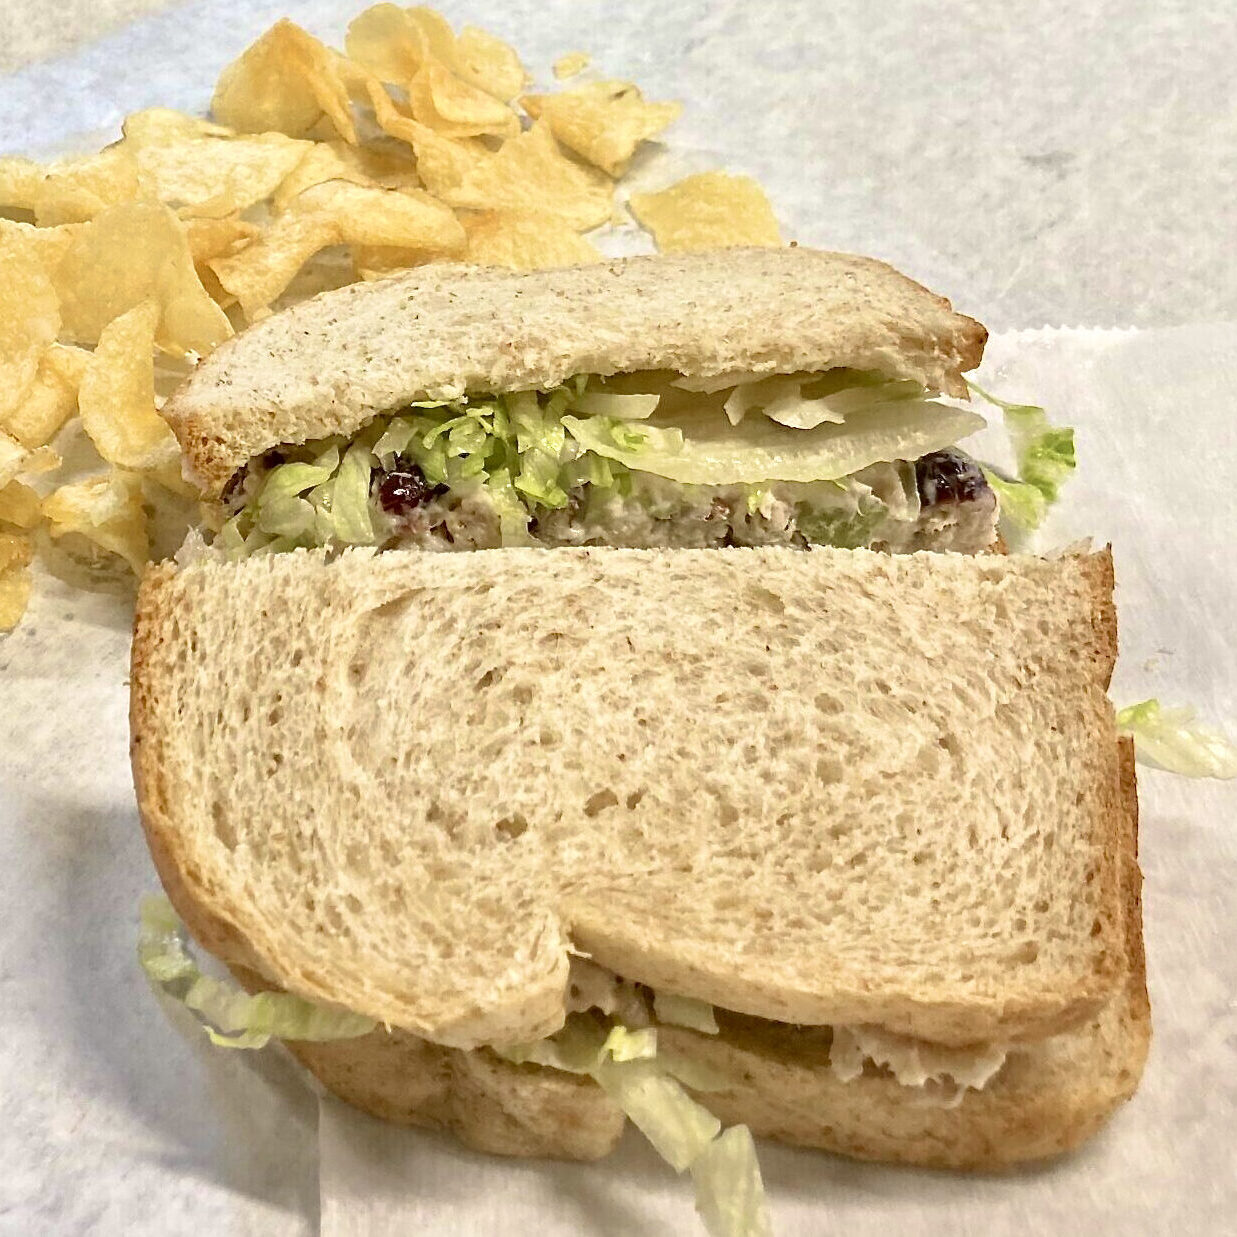 Chicken-Salad-Sandwich-Jimmy-1-1397-scaled-square-36674b8287261a26eaa25e2f1117be7f-5ee0d2d5261d5 2